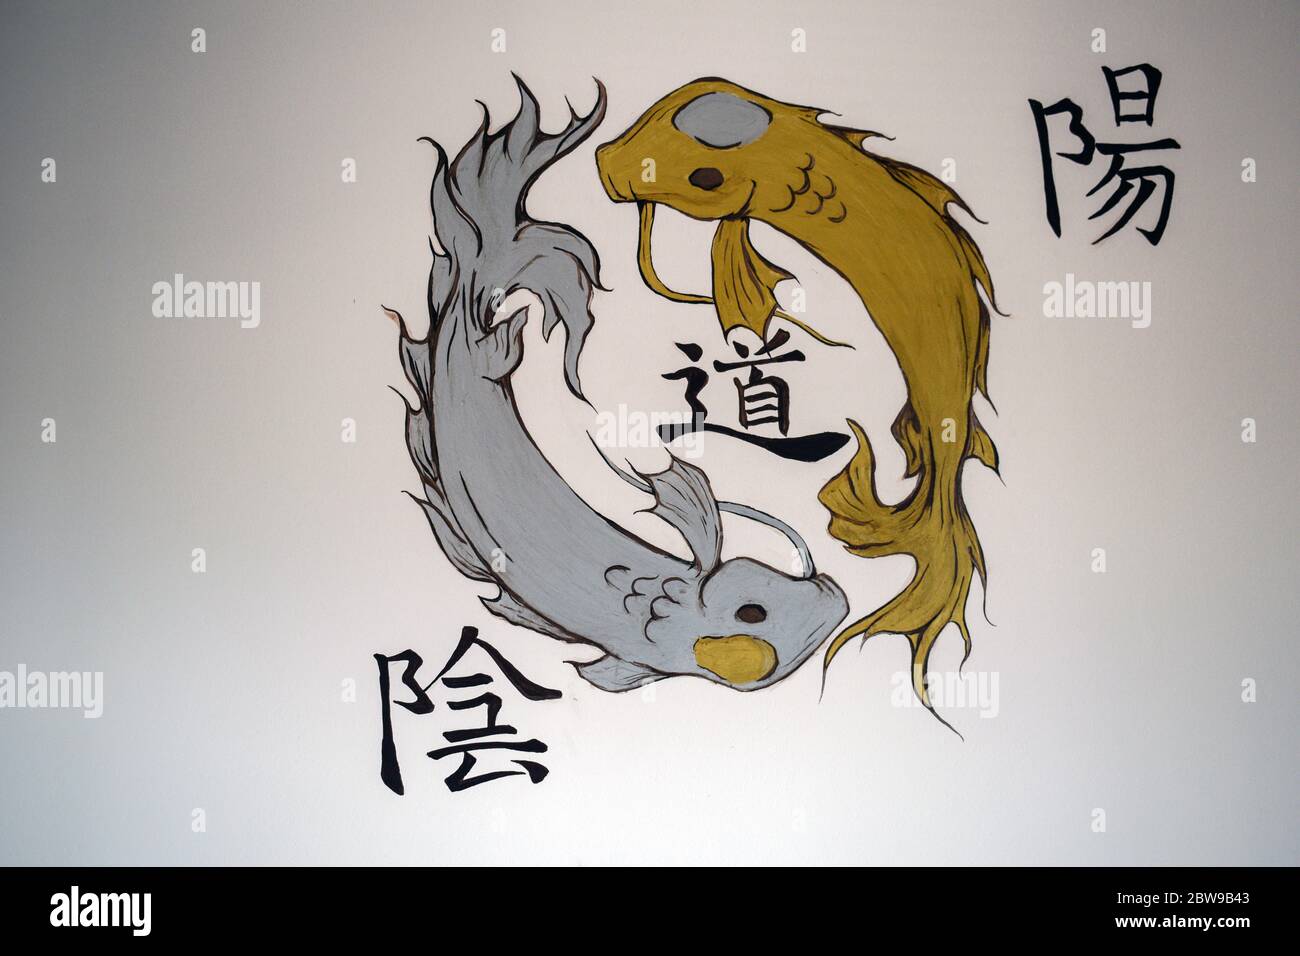 Koi fish in chinese letters painted on wall Stock Photo - Alamy